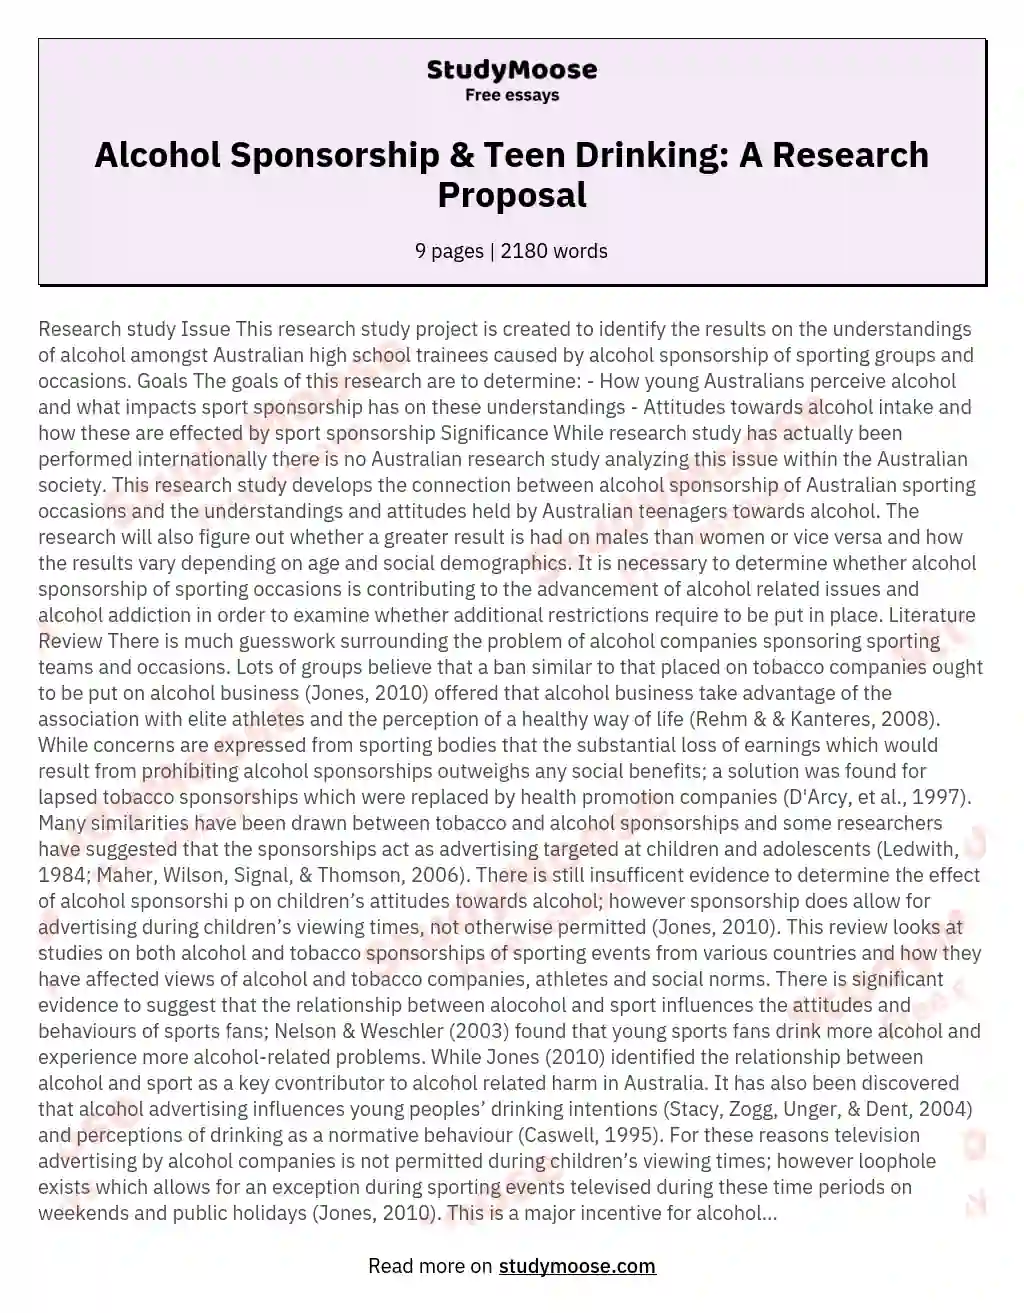 Alcohol Sponsorship & Teen Drinking: A Research Proposal essay